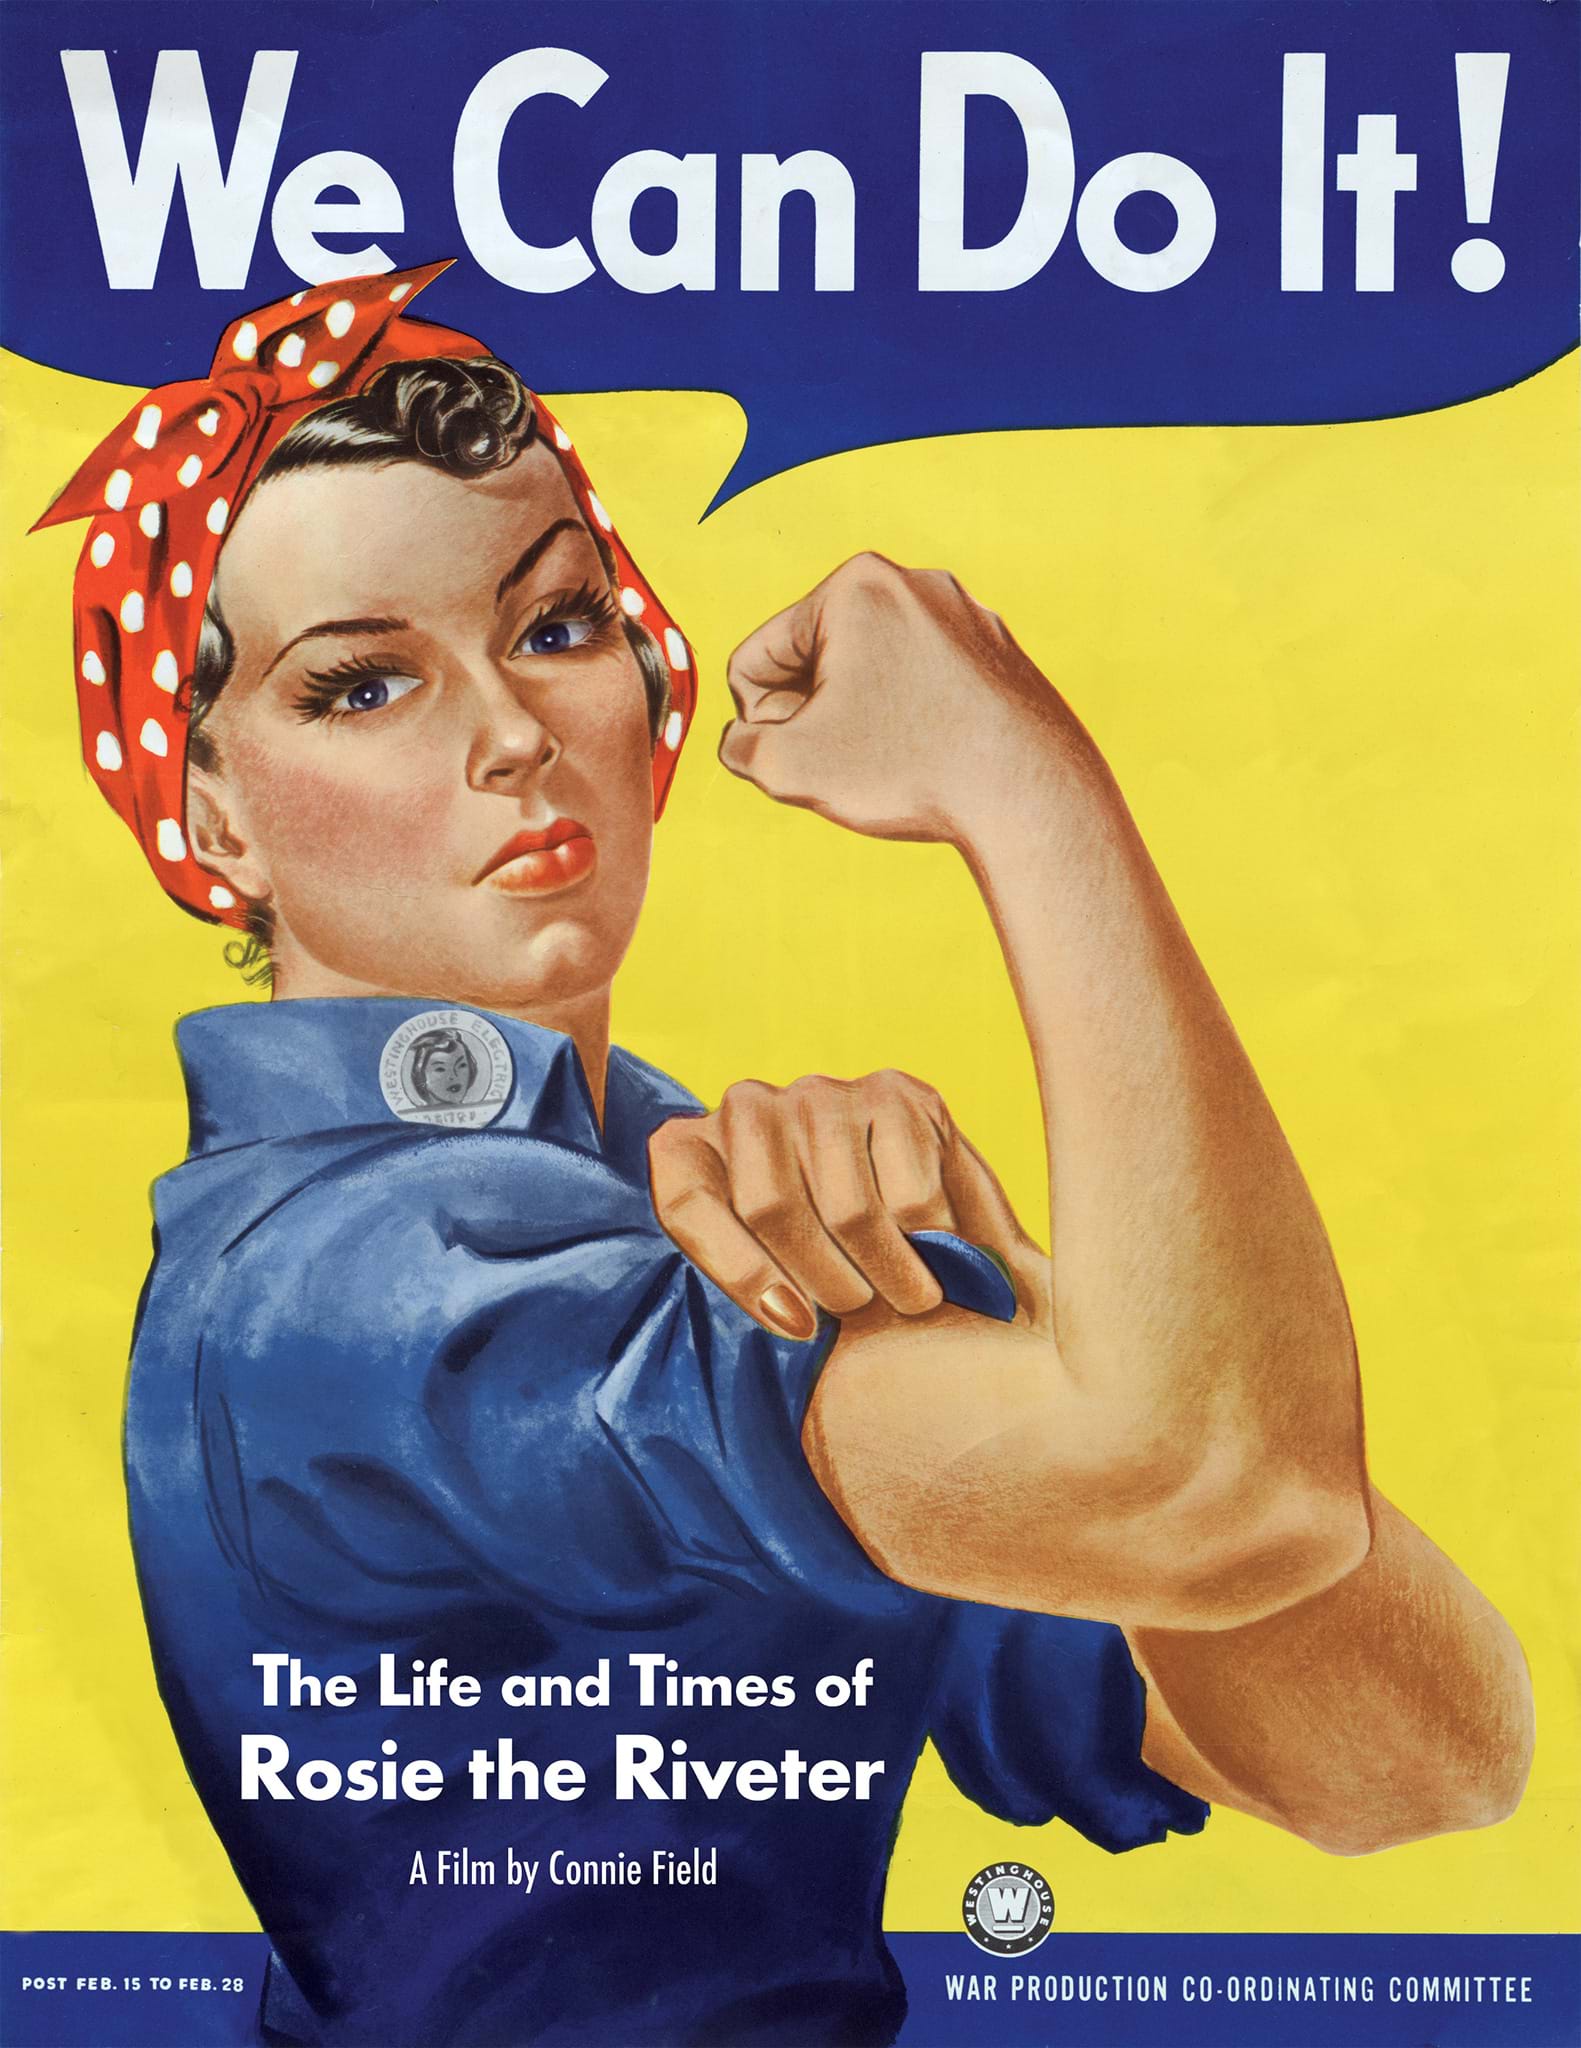 The movie poster for The Life and Times of Rosie the Riveter, featuring Rosie the Riveter flexing her bicep with a speech bubble that says "We Can Do It!"